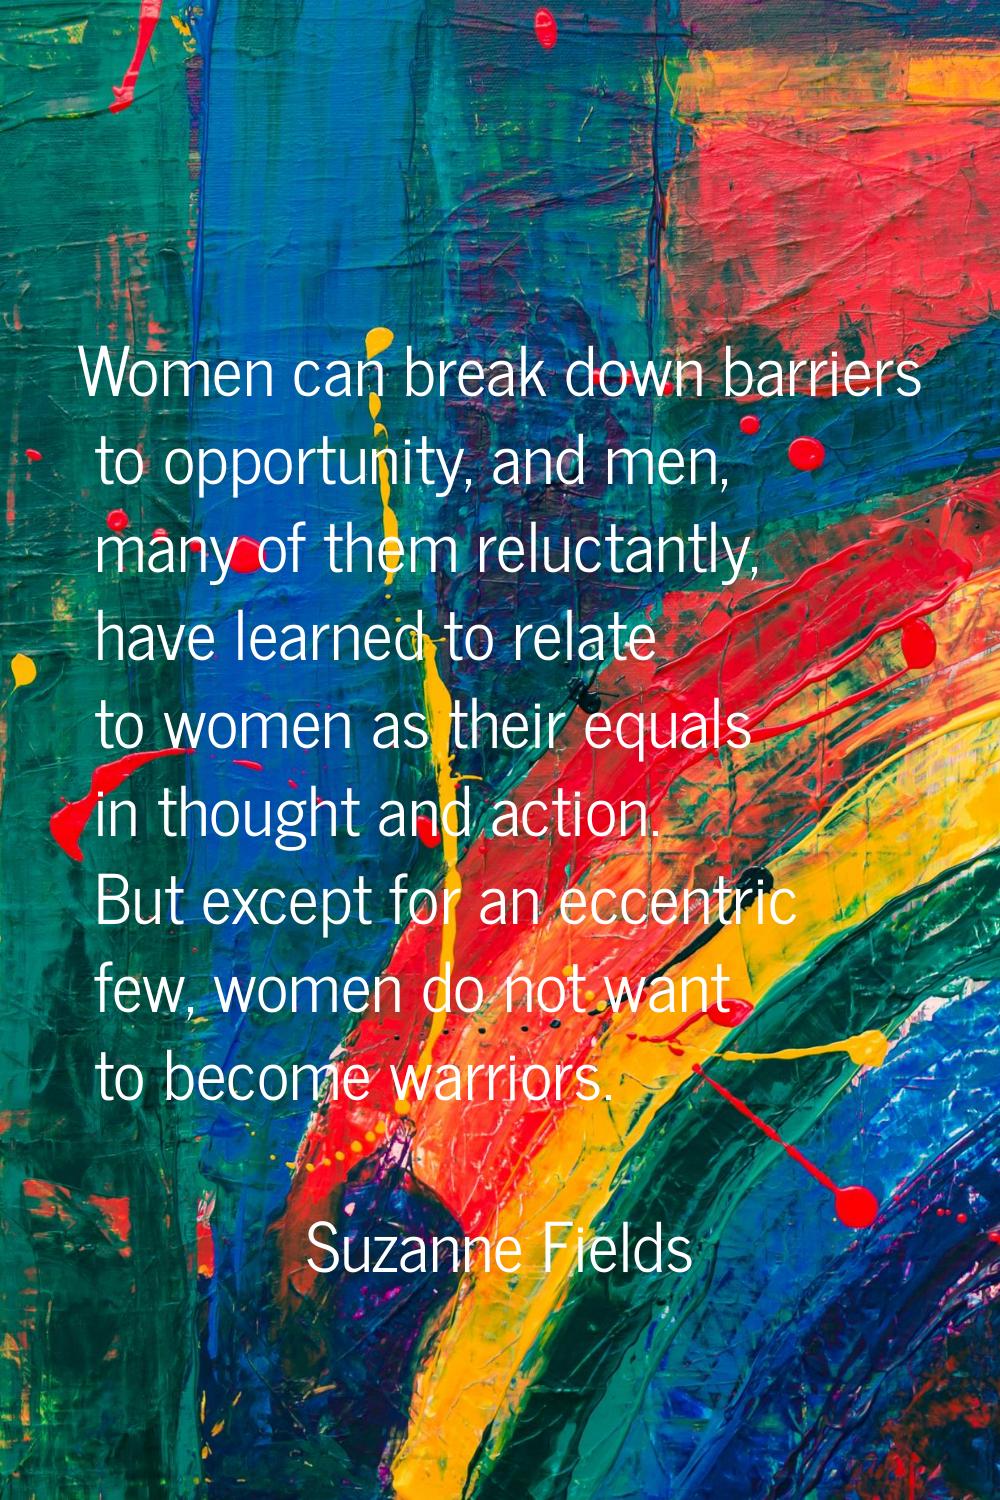 Women can break down barriers to opportunity, and men, many of them reluctantly, have learned to re